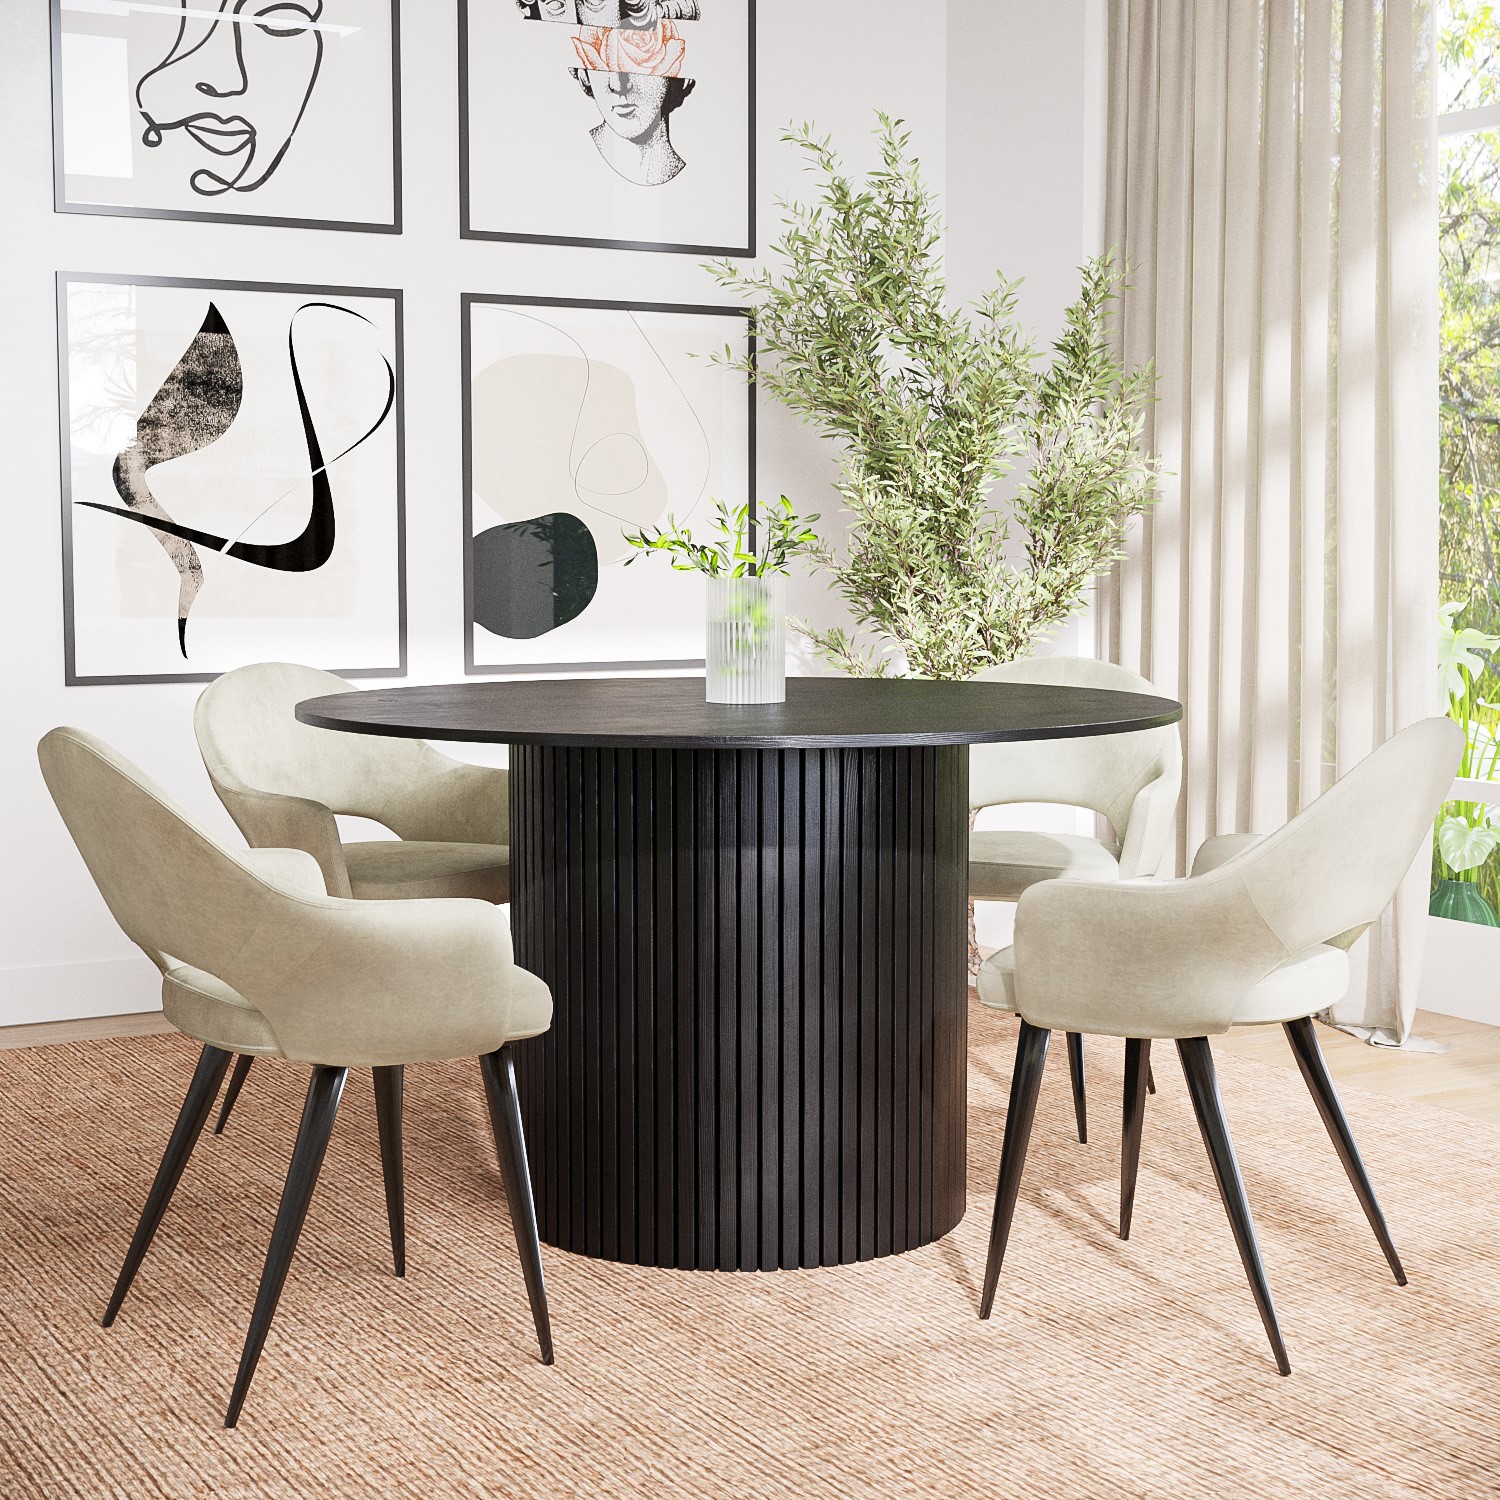 Photo of Round black oak dining table with 4 beige fabric dining chairs - jarel